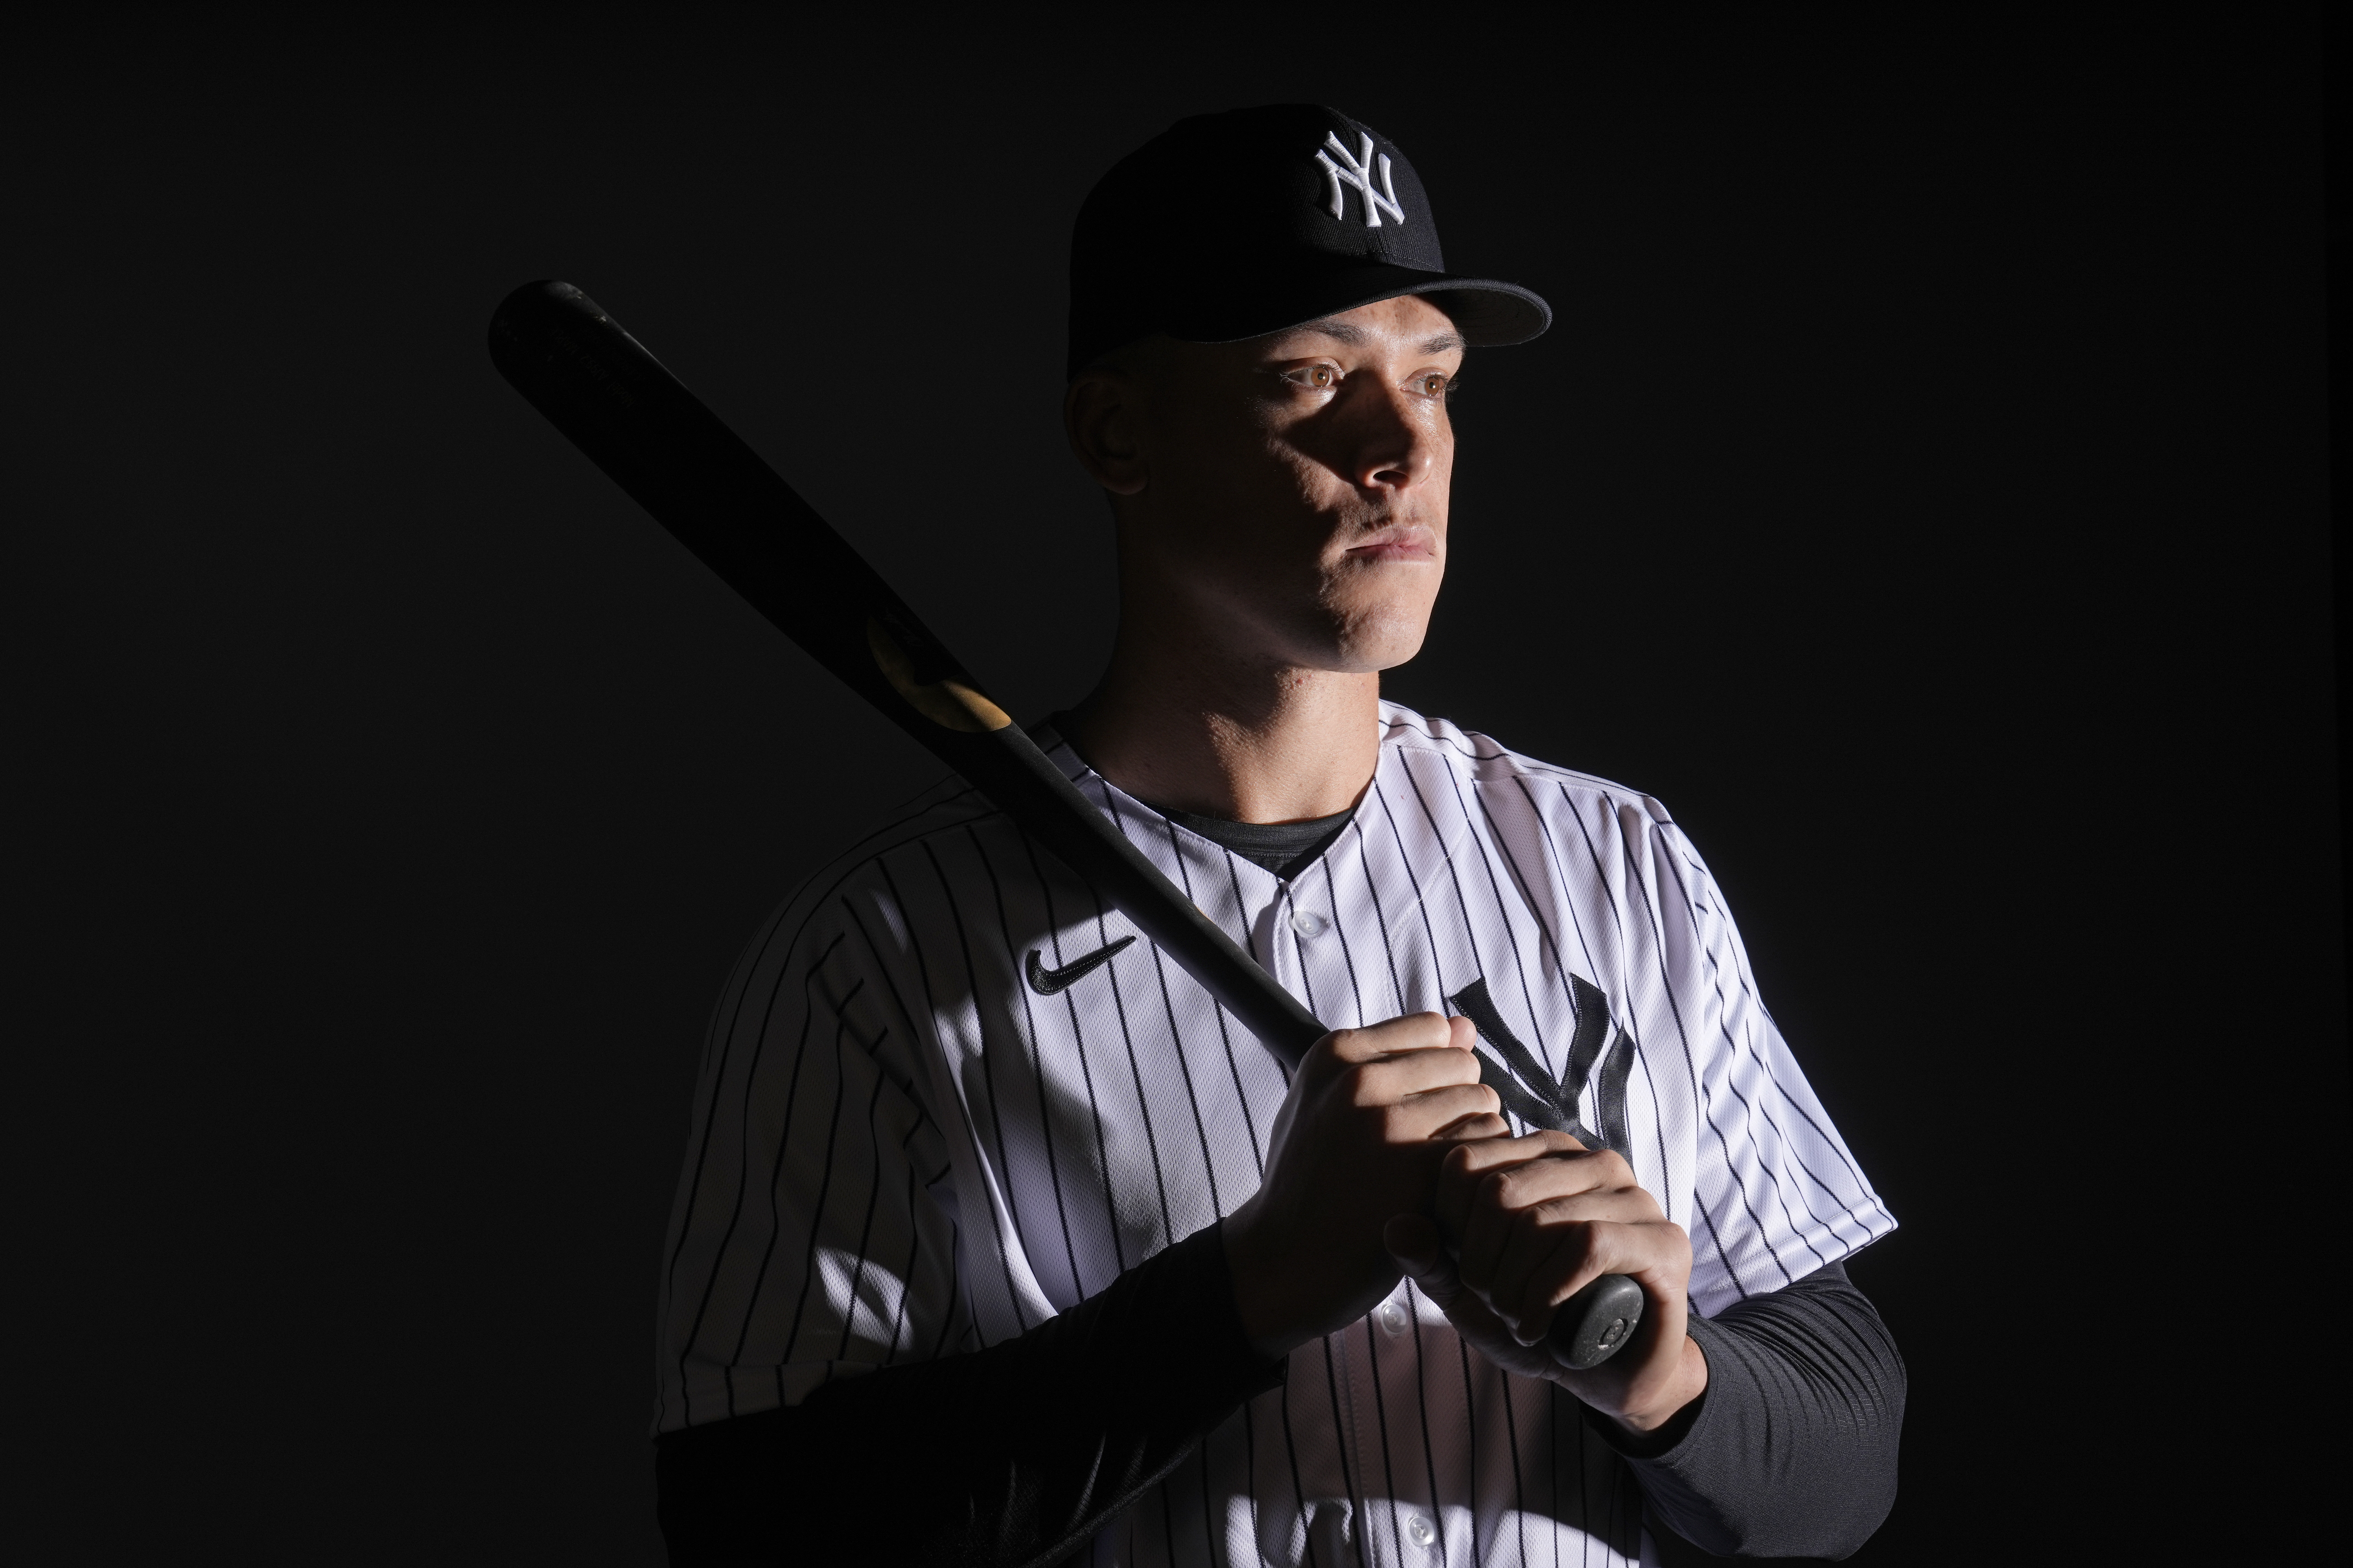 Yankees' Aaron Judge reflects on October booing at Stadium